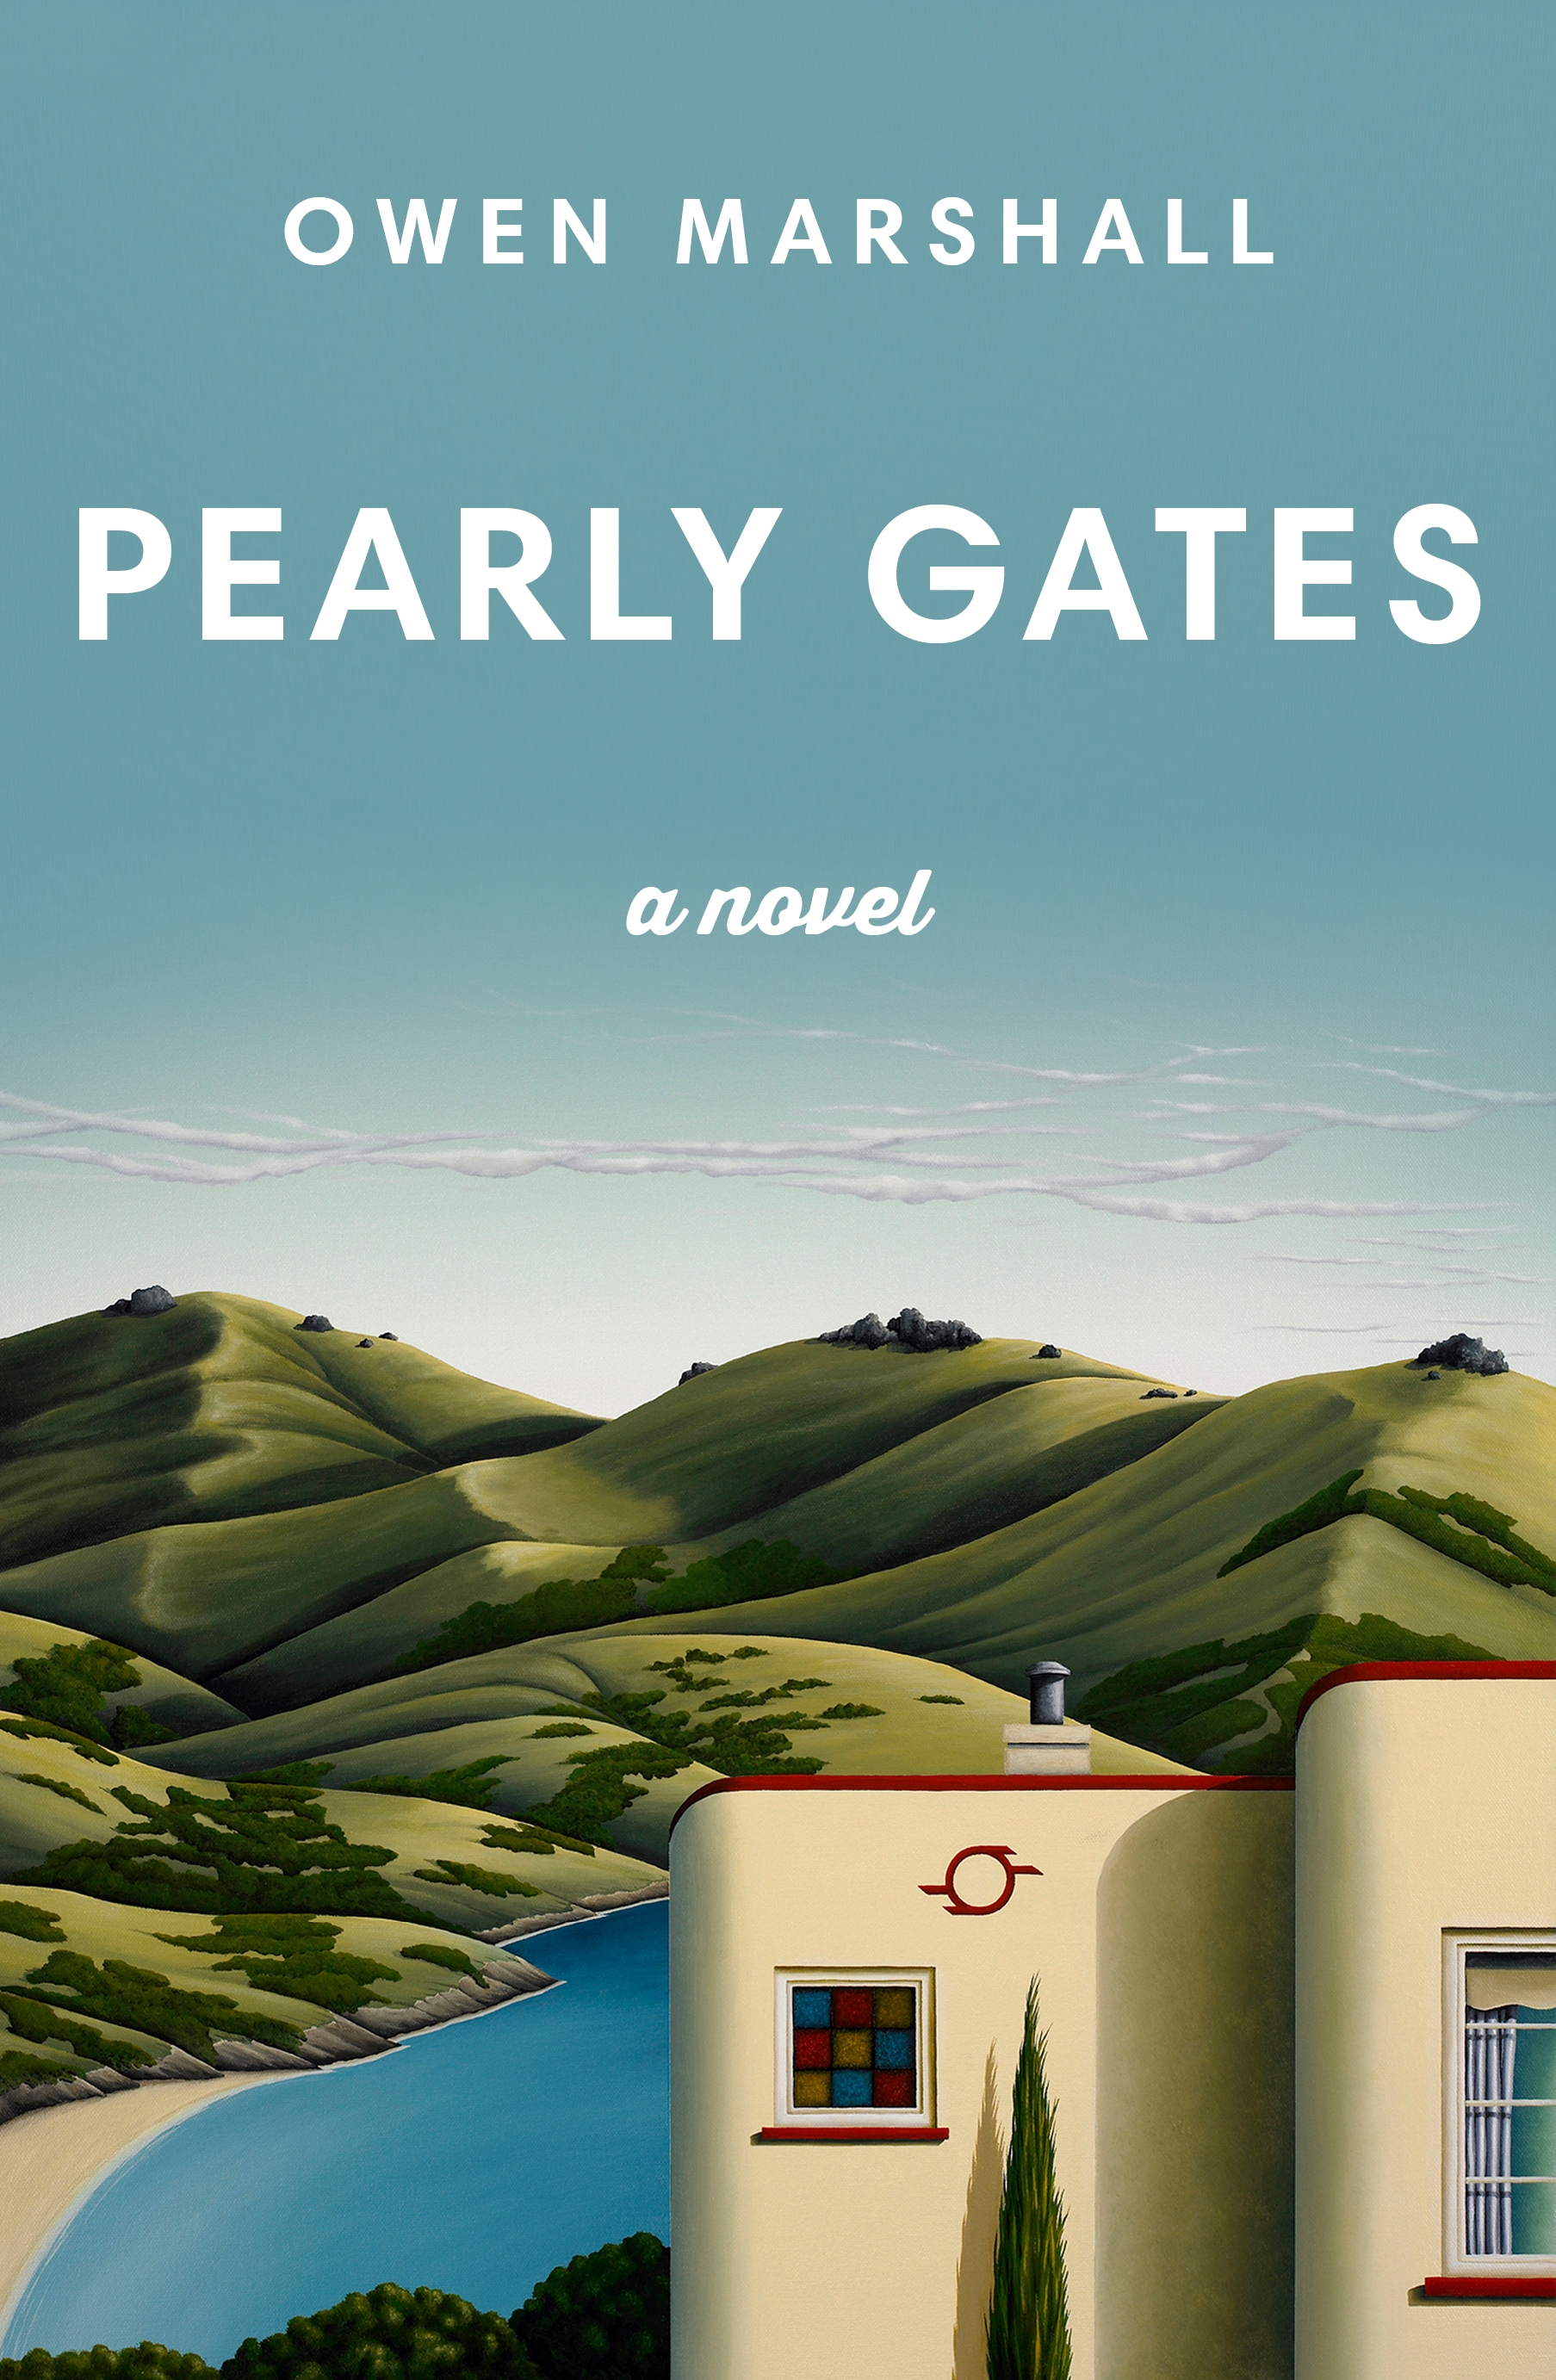 Pearly Gates by Owen Marshall - Penguin Books New Zealand